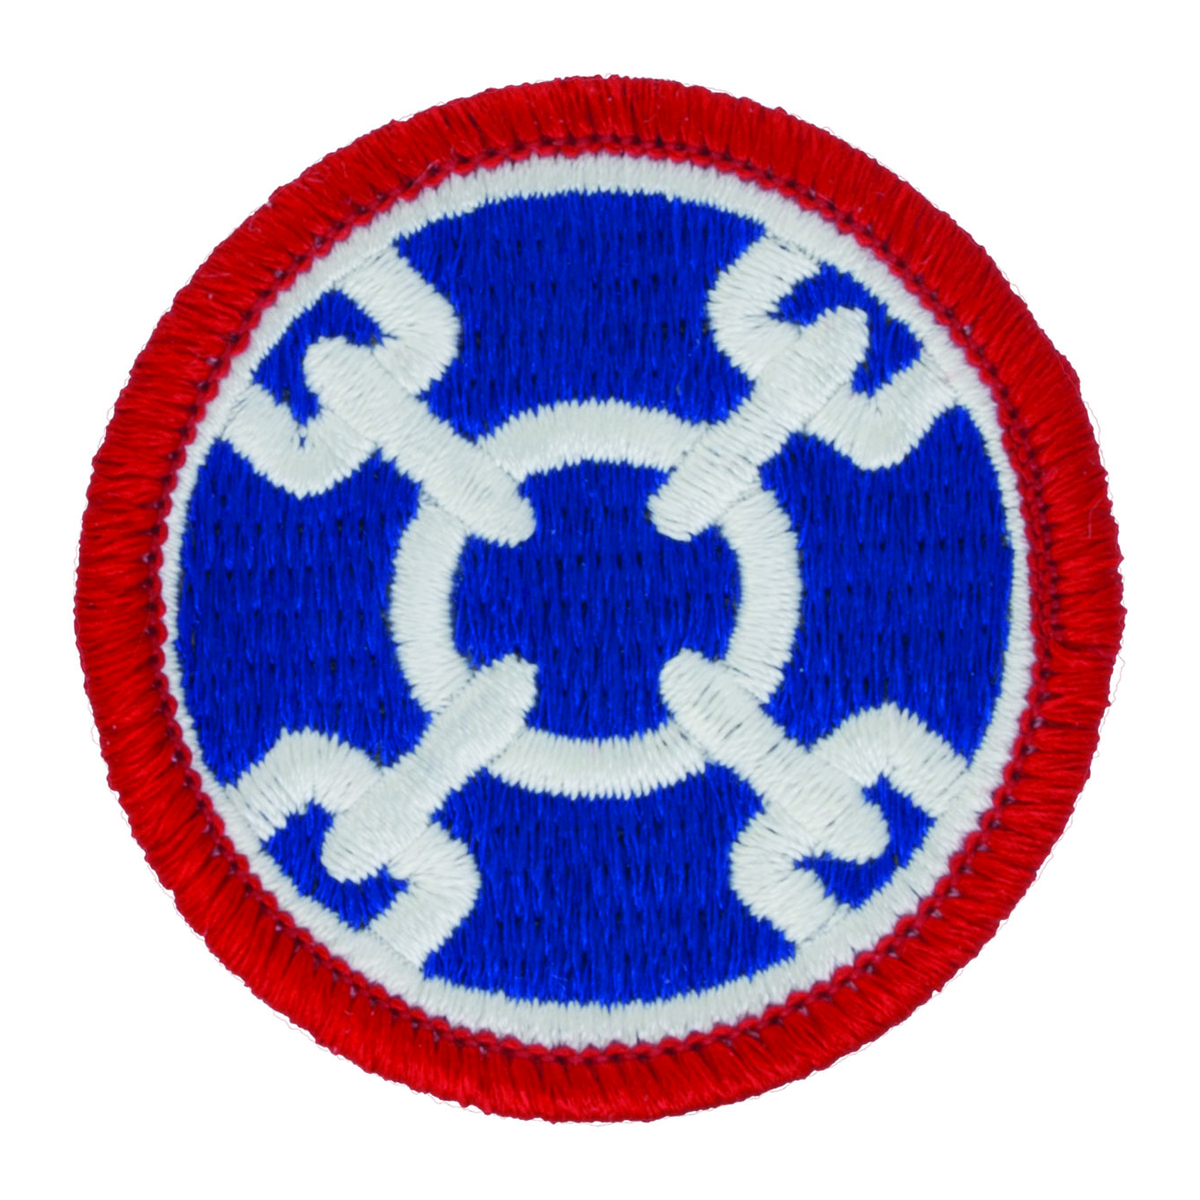 310th Support Command Patch - Full Color Dress